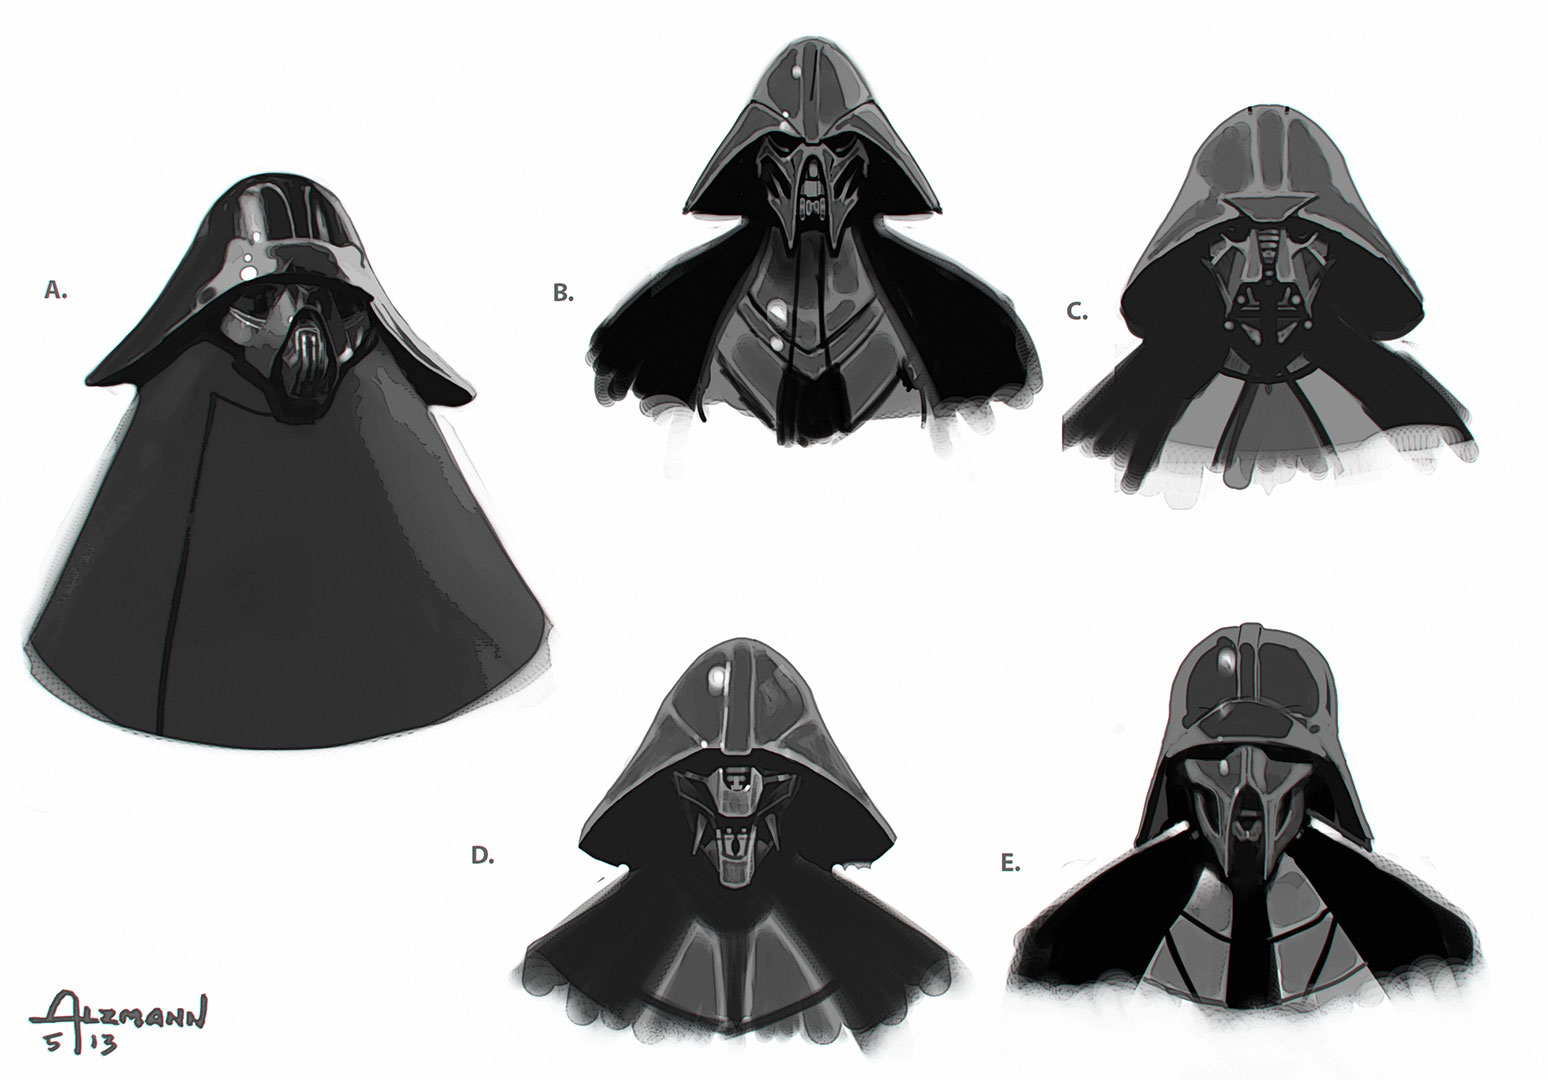 The Force Awakens’ Concept Art Had Some Cool Ideas